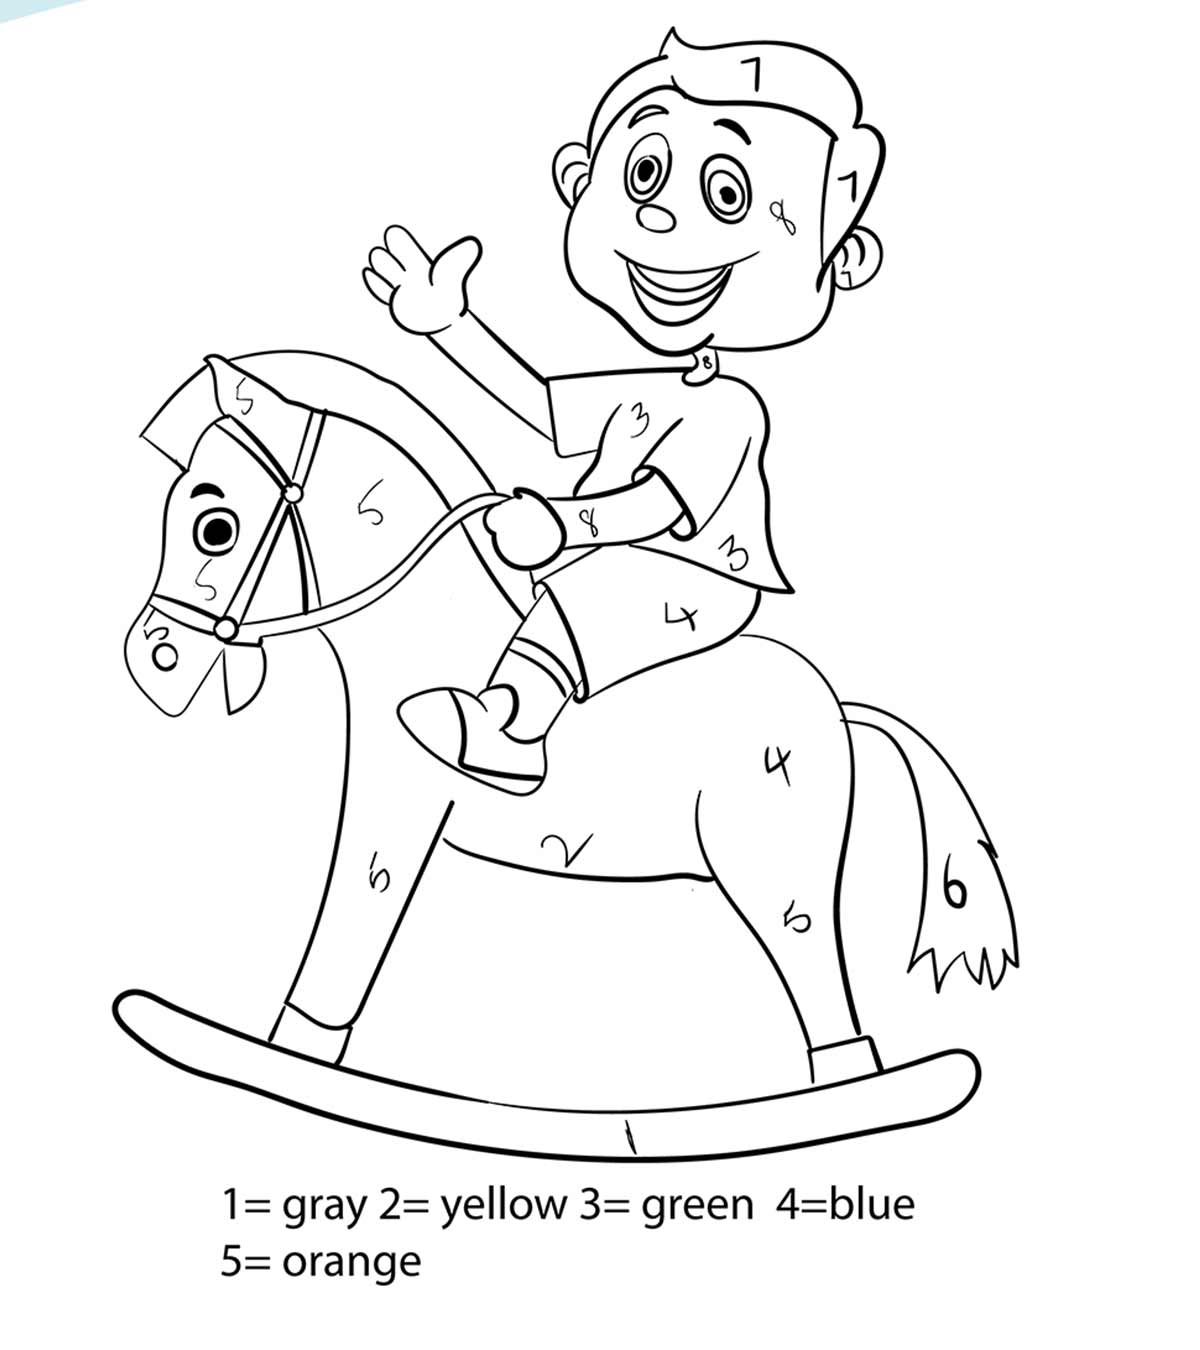 Top 10 Color By Number Coloring Pages_image